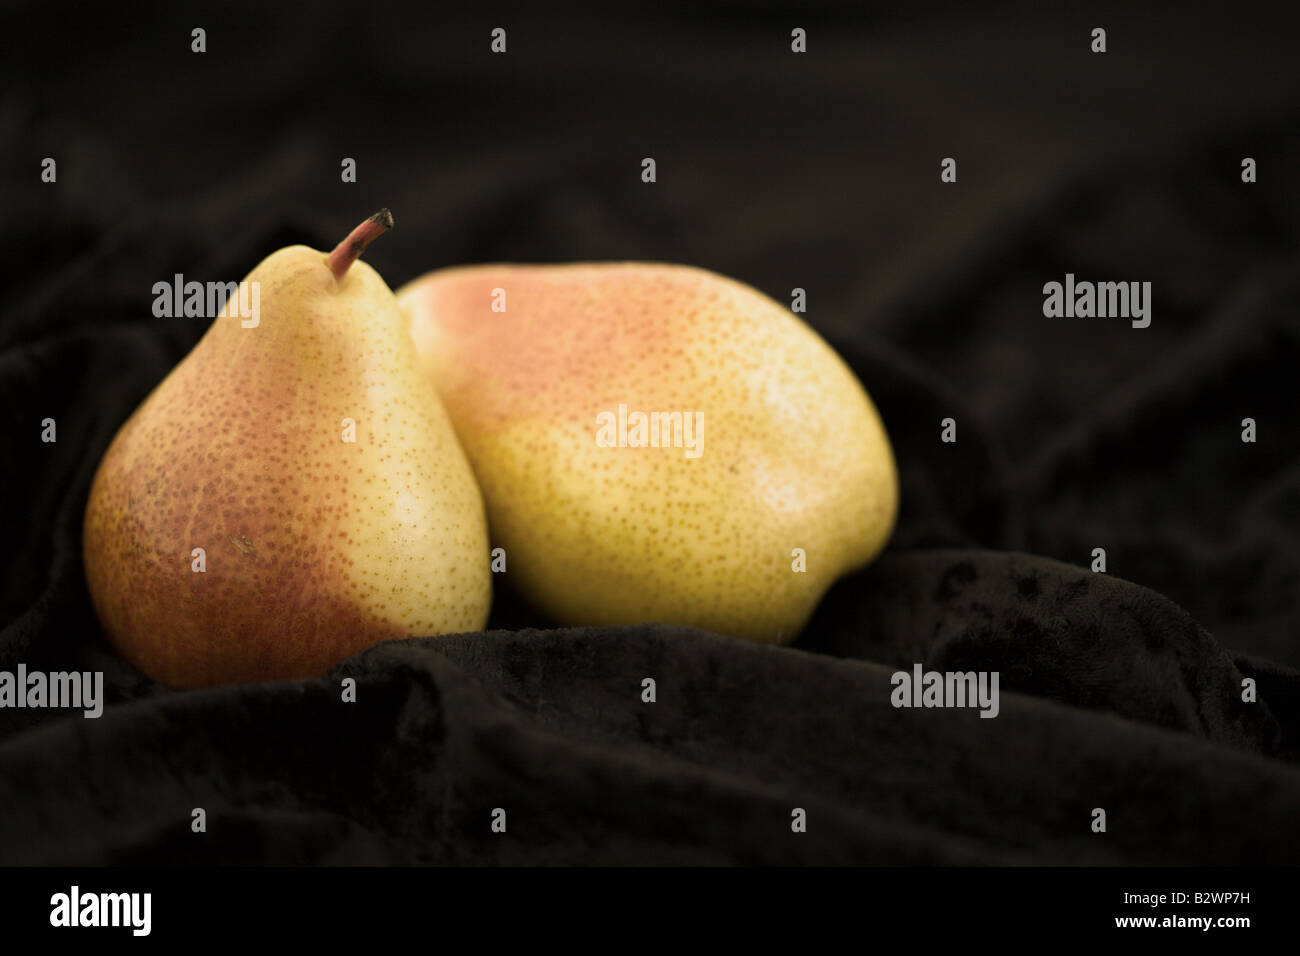 two pears of "Forelle" sort placed on black velveteen fabric Stock Photo